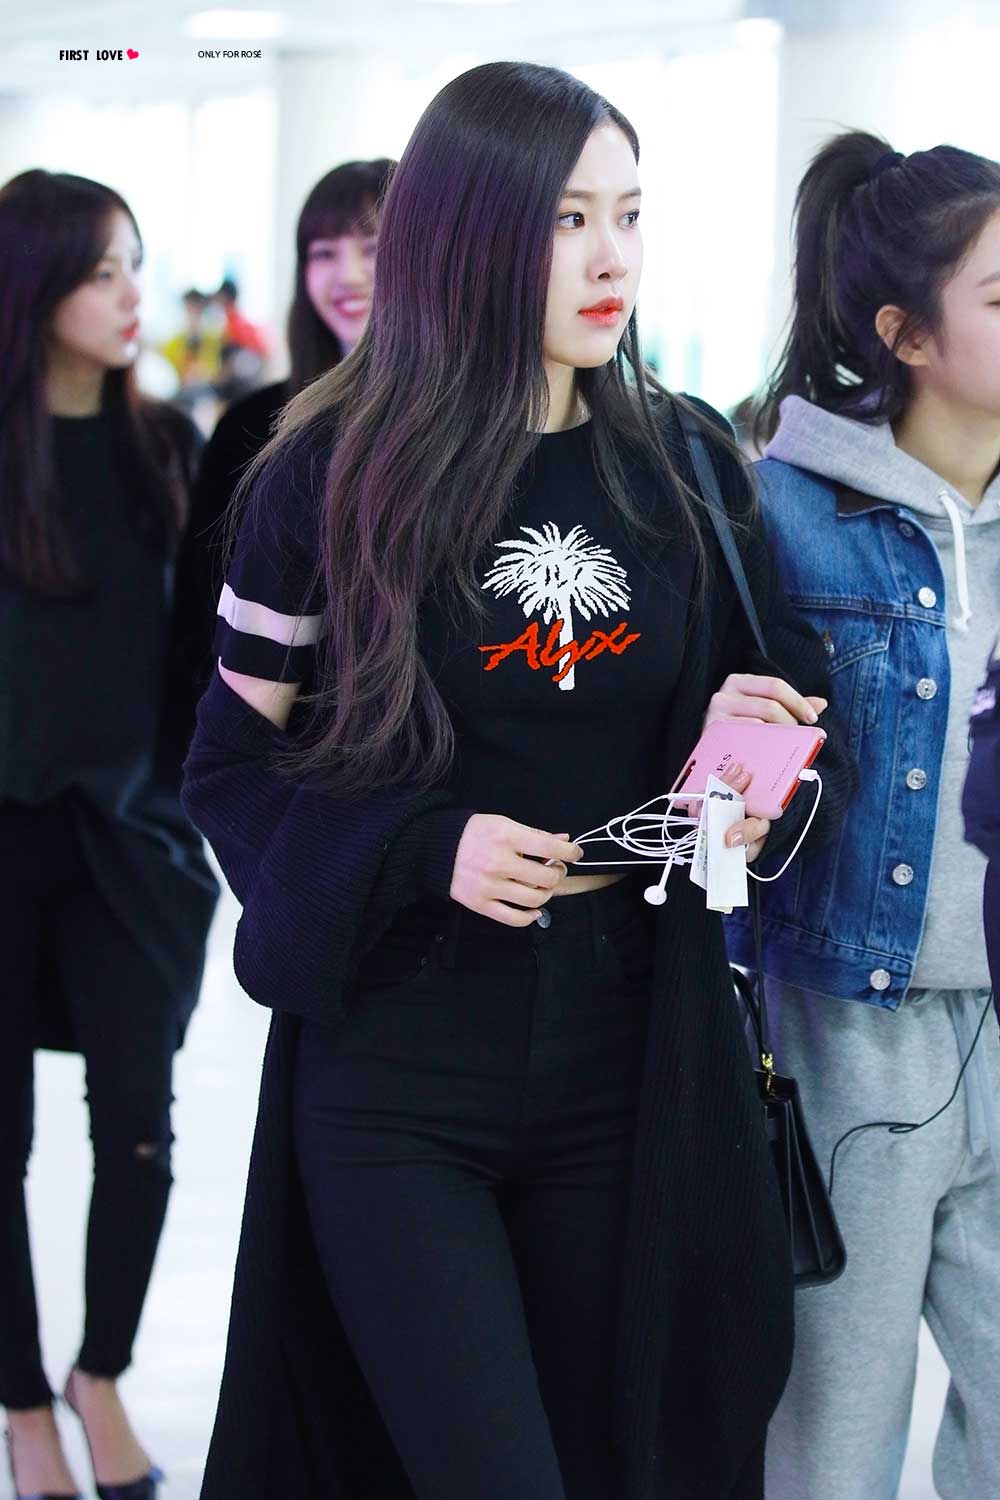 Blackpink Rose Airport Fashion 26 March 2018